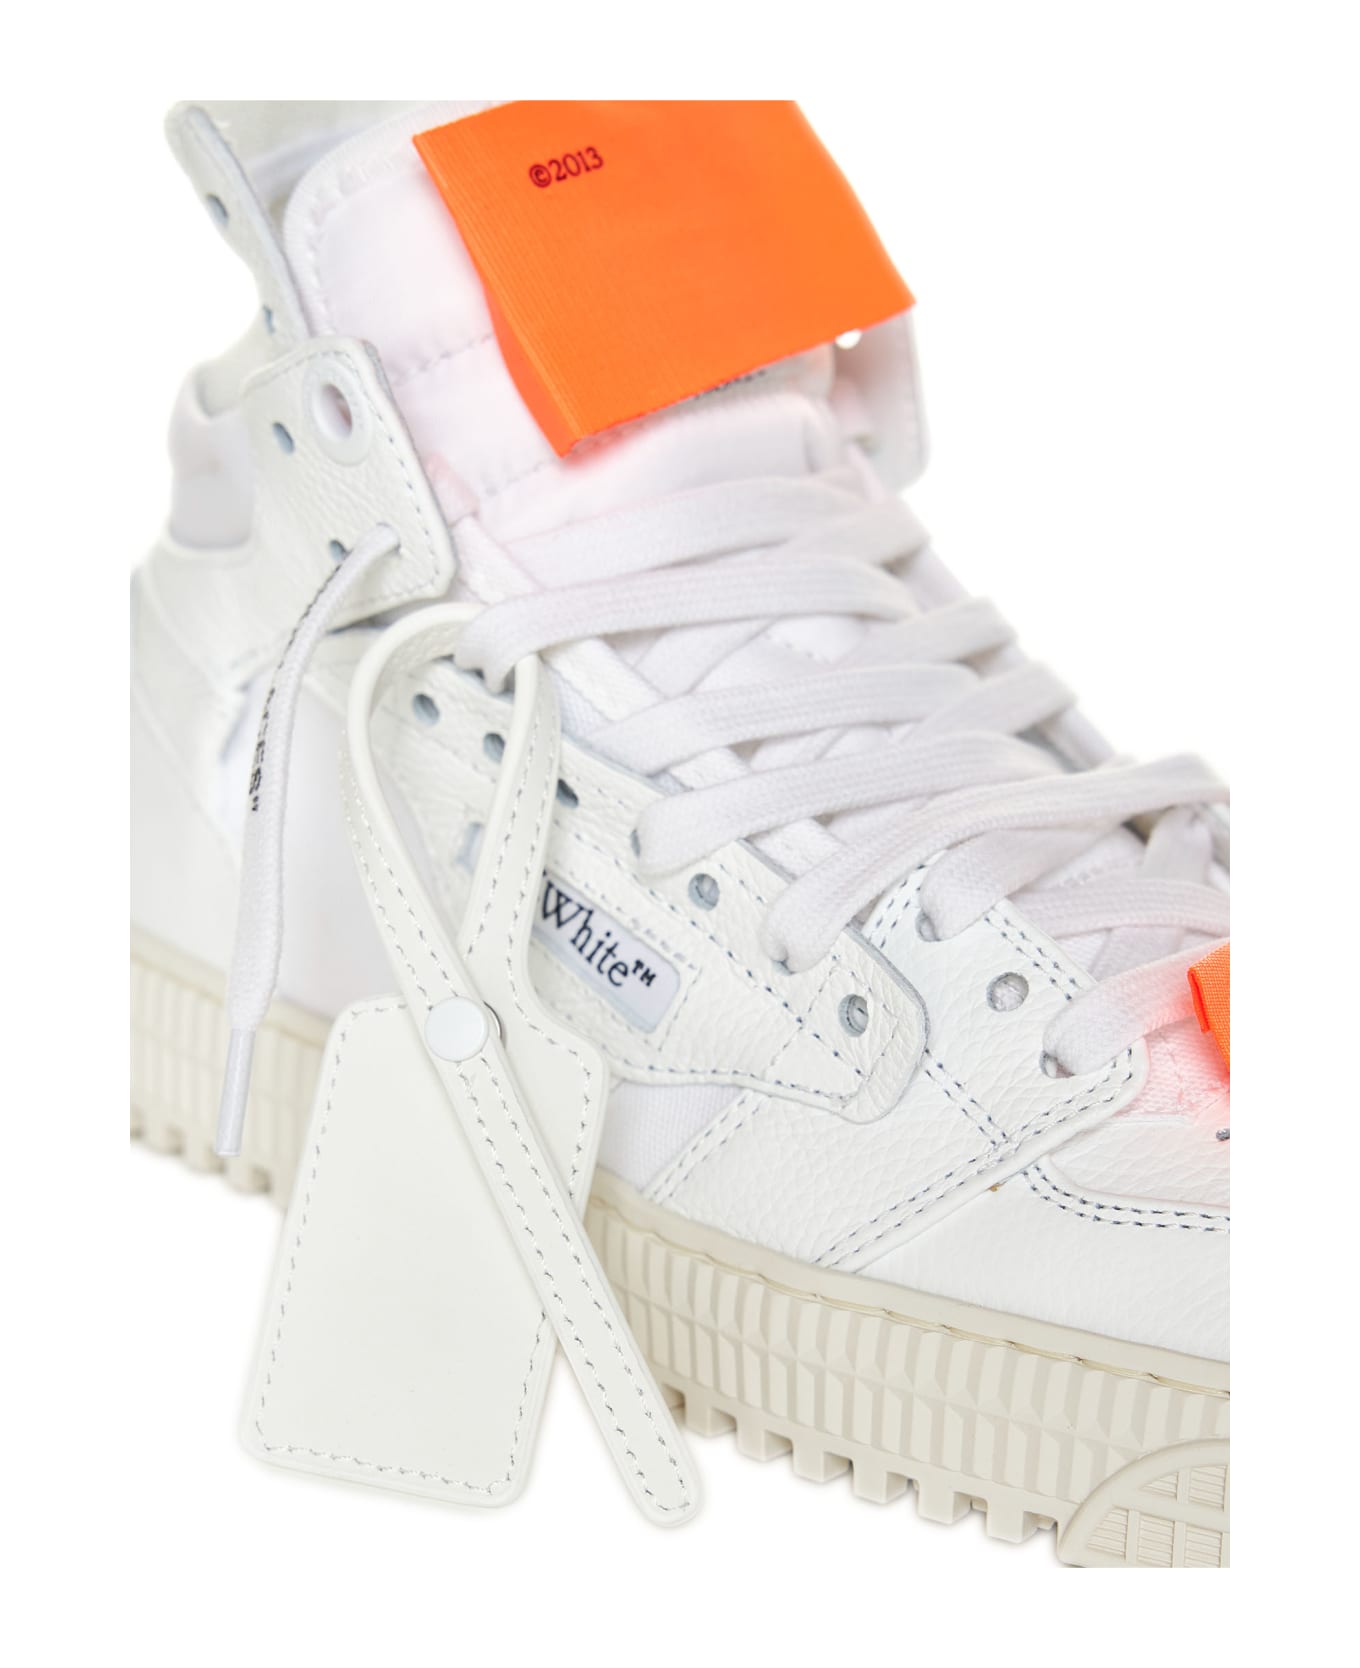 Off-White 3.0 Off Court Sneakers - White